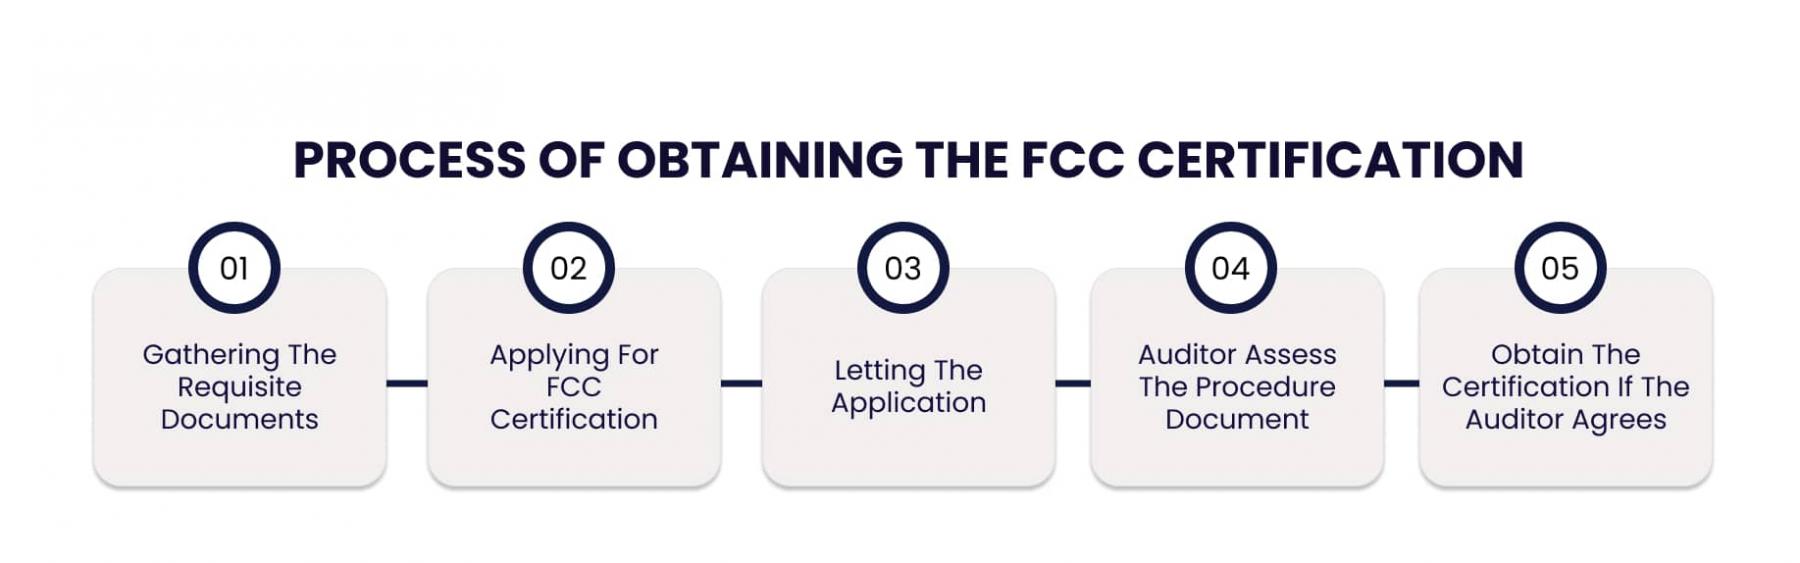 Process of obtaining the FCC Certification in India